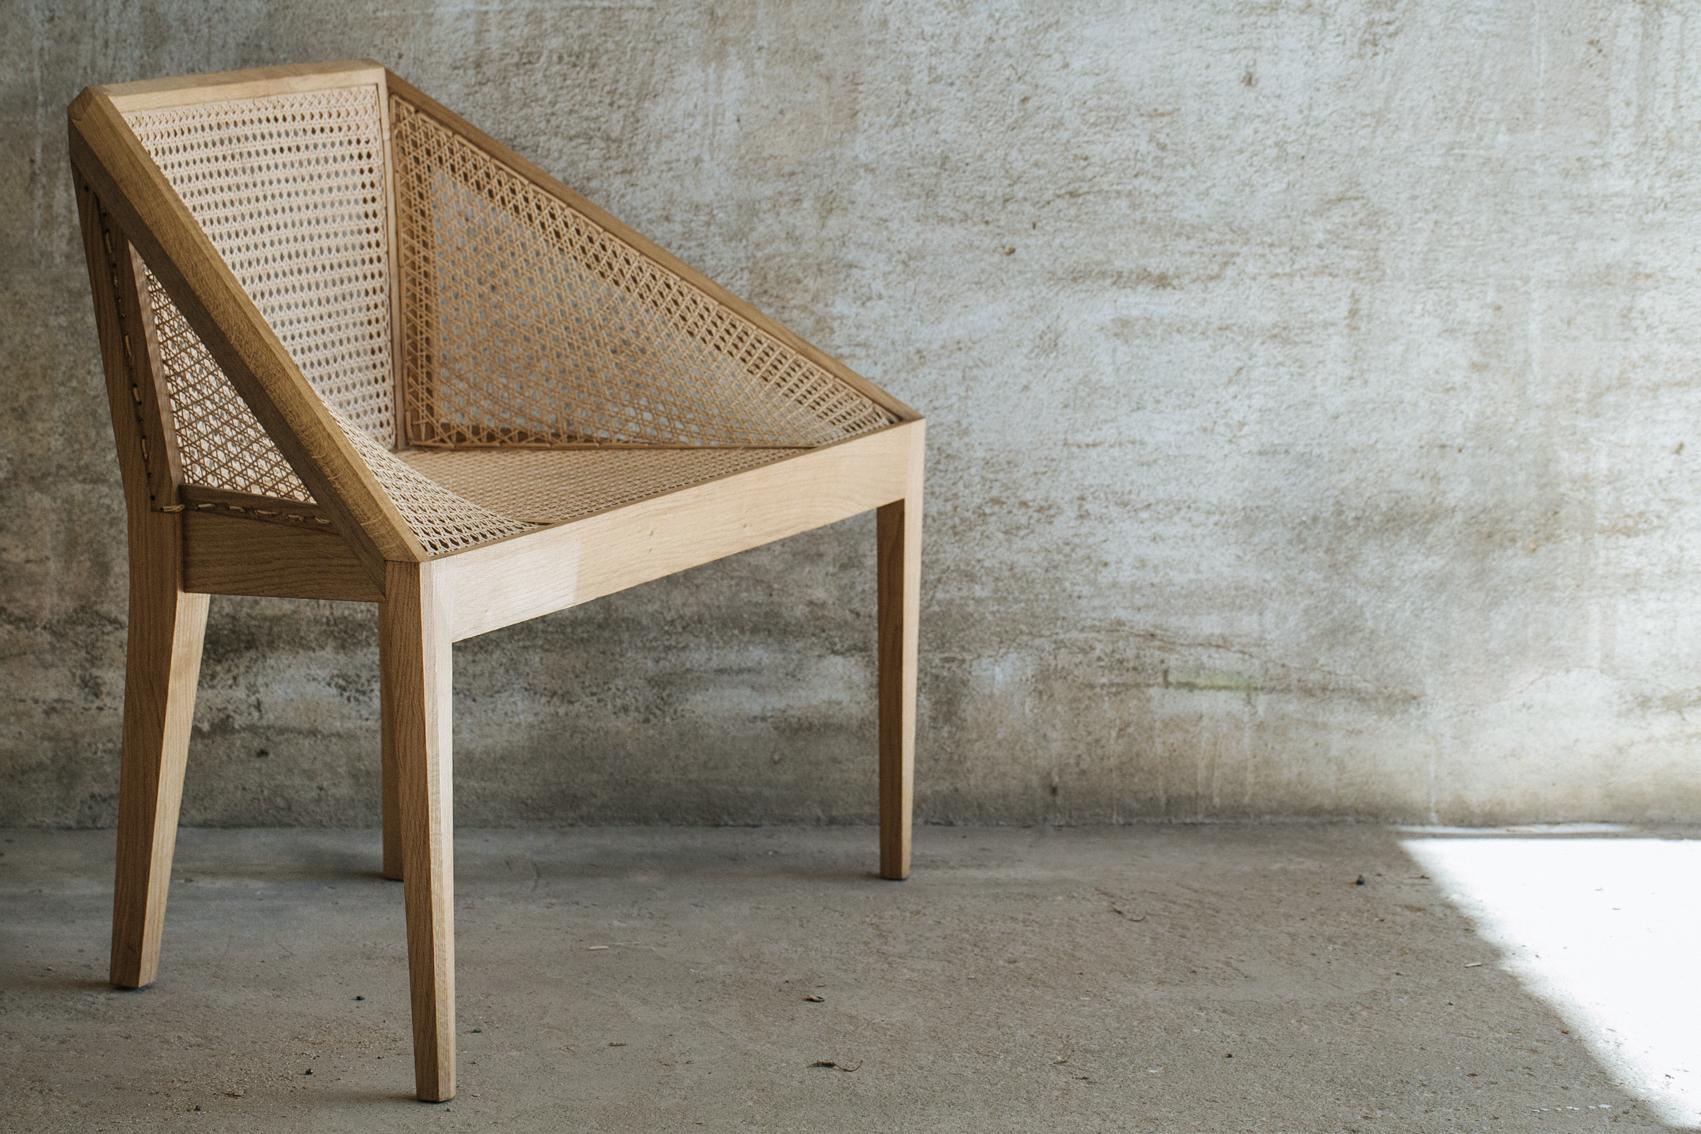 Post-Modern Chair 1. Wicker Weave Light and Sculptural Lounge Chair Prototype by Tomaz Viana For Sale